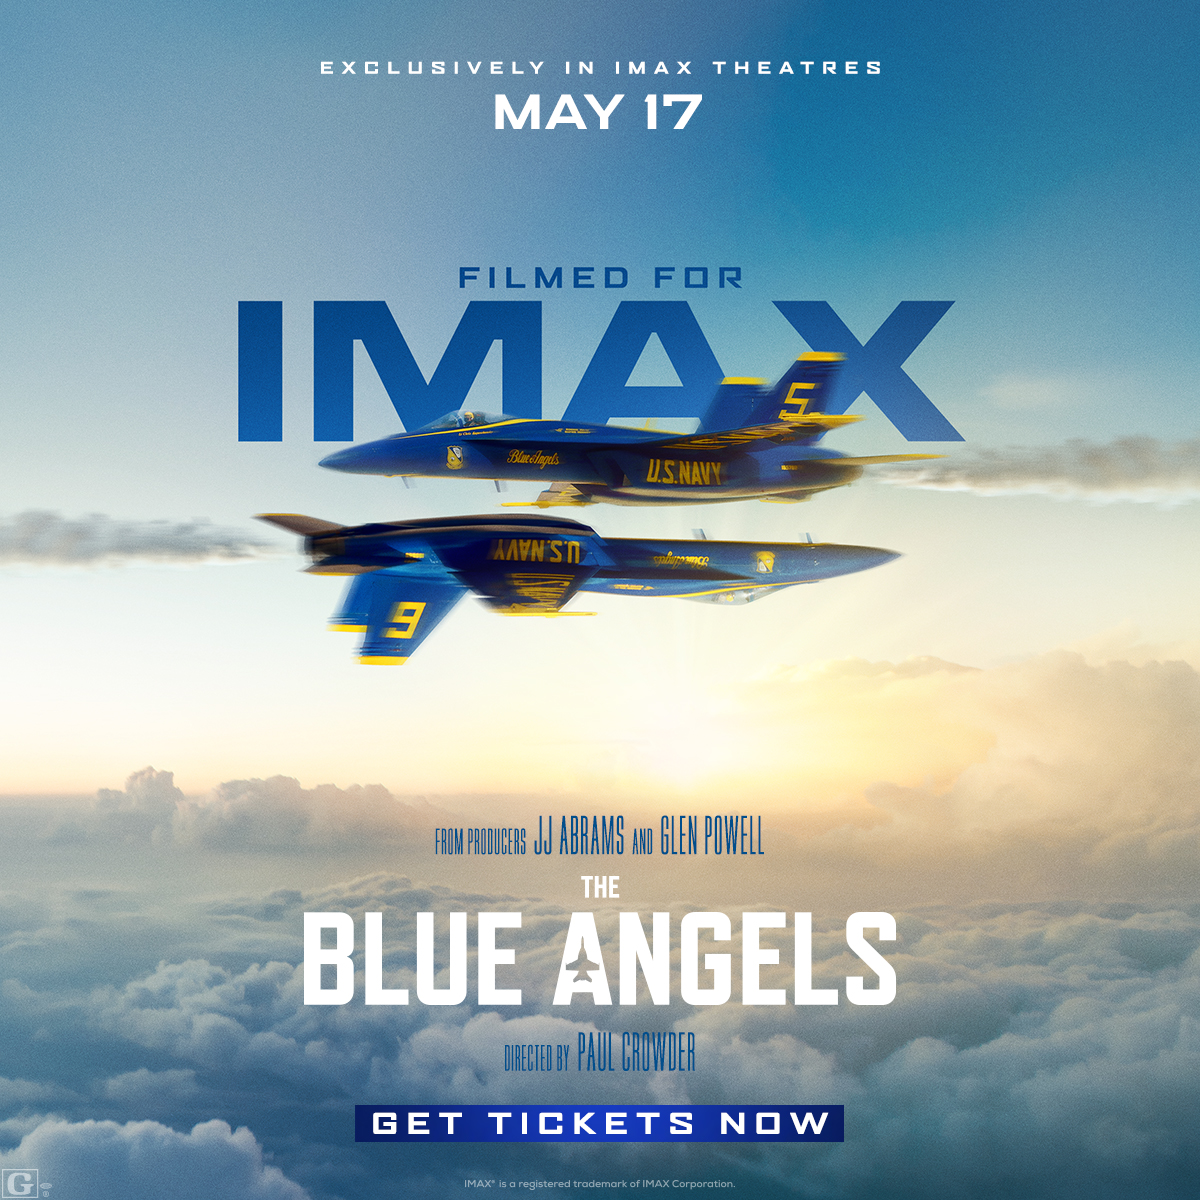 The #AirandSeaShow fun doesn't have to end this weekend. Trade in your beach chair for a theater seat and watch the #BlueAngels soar - on the GIANT screen!✈️💨 

Screenings start May 17. #EveryoneUndertheSun

🔗Tickets: bit.ly/3Uy0ChR